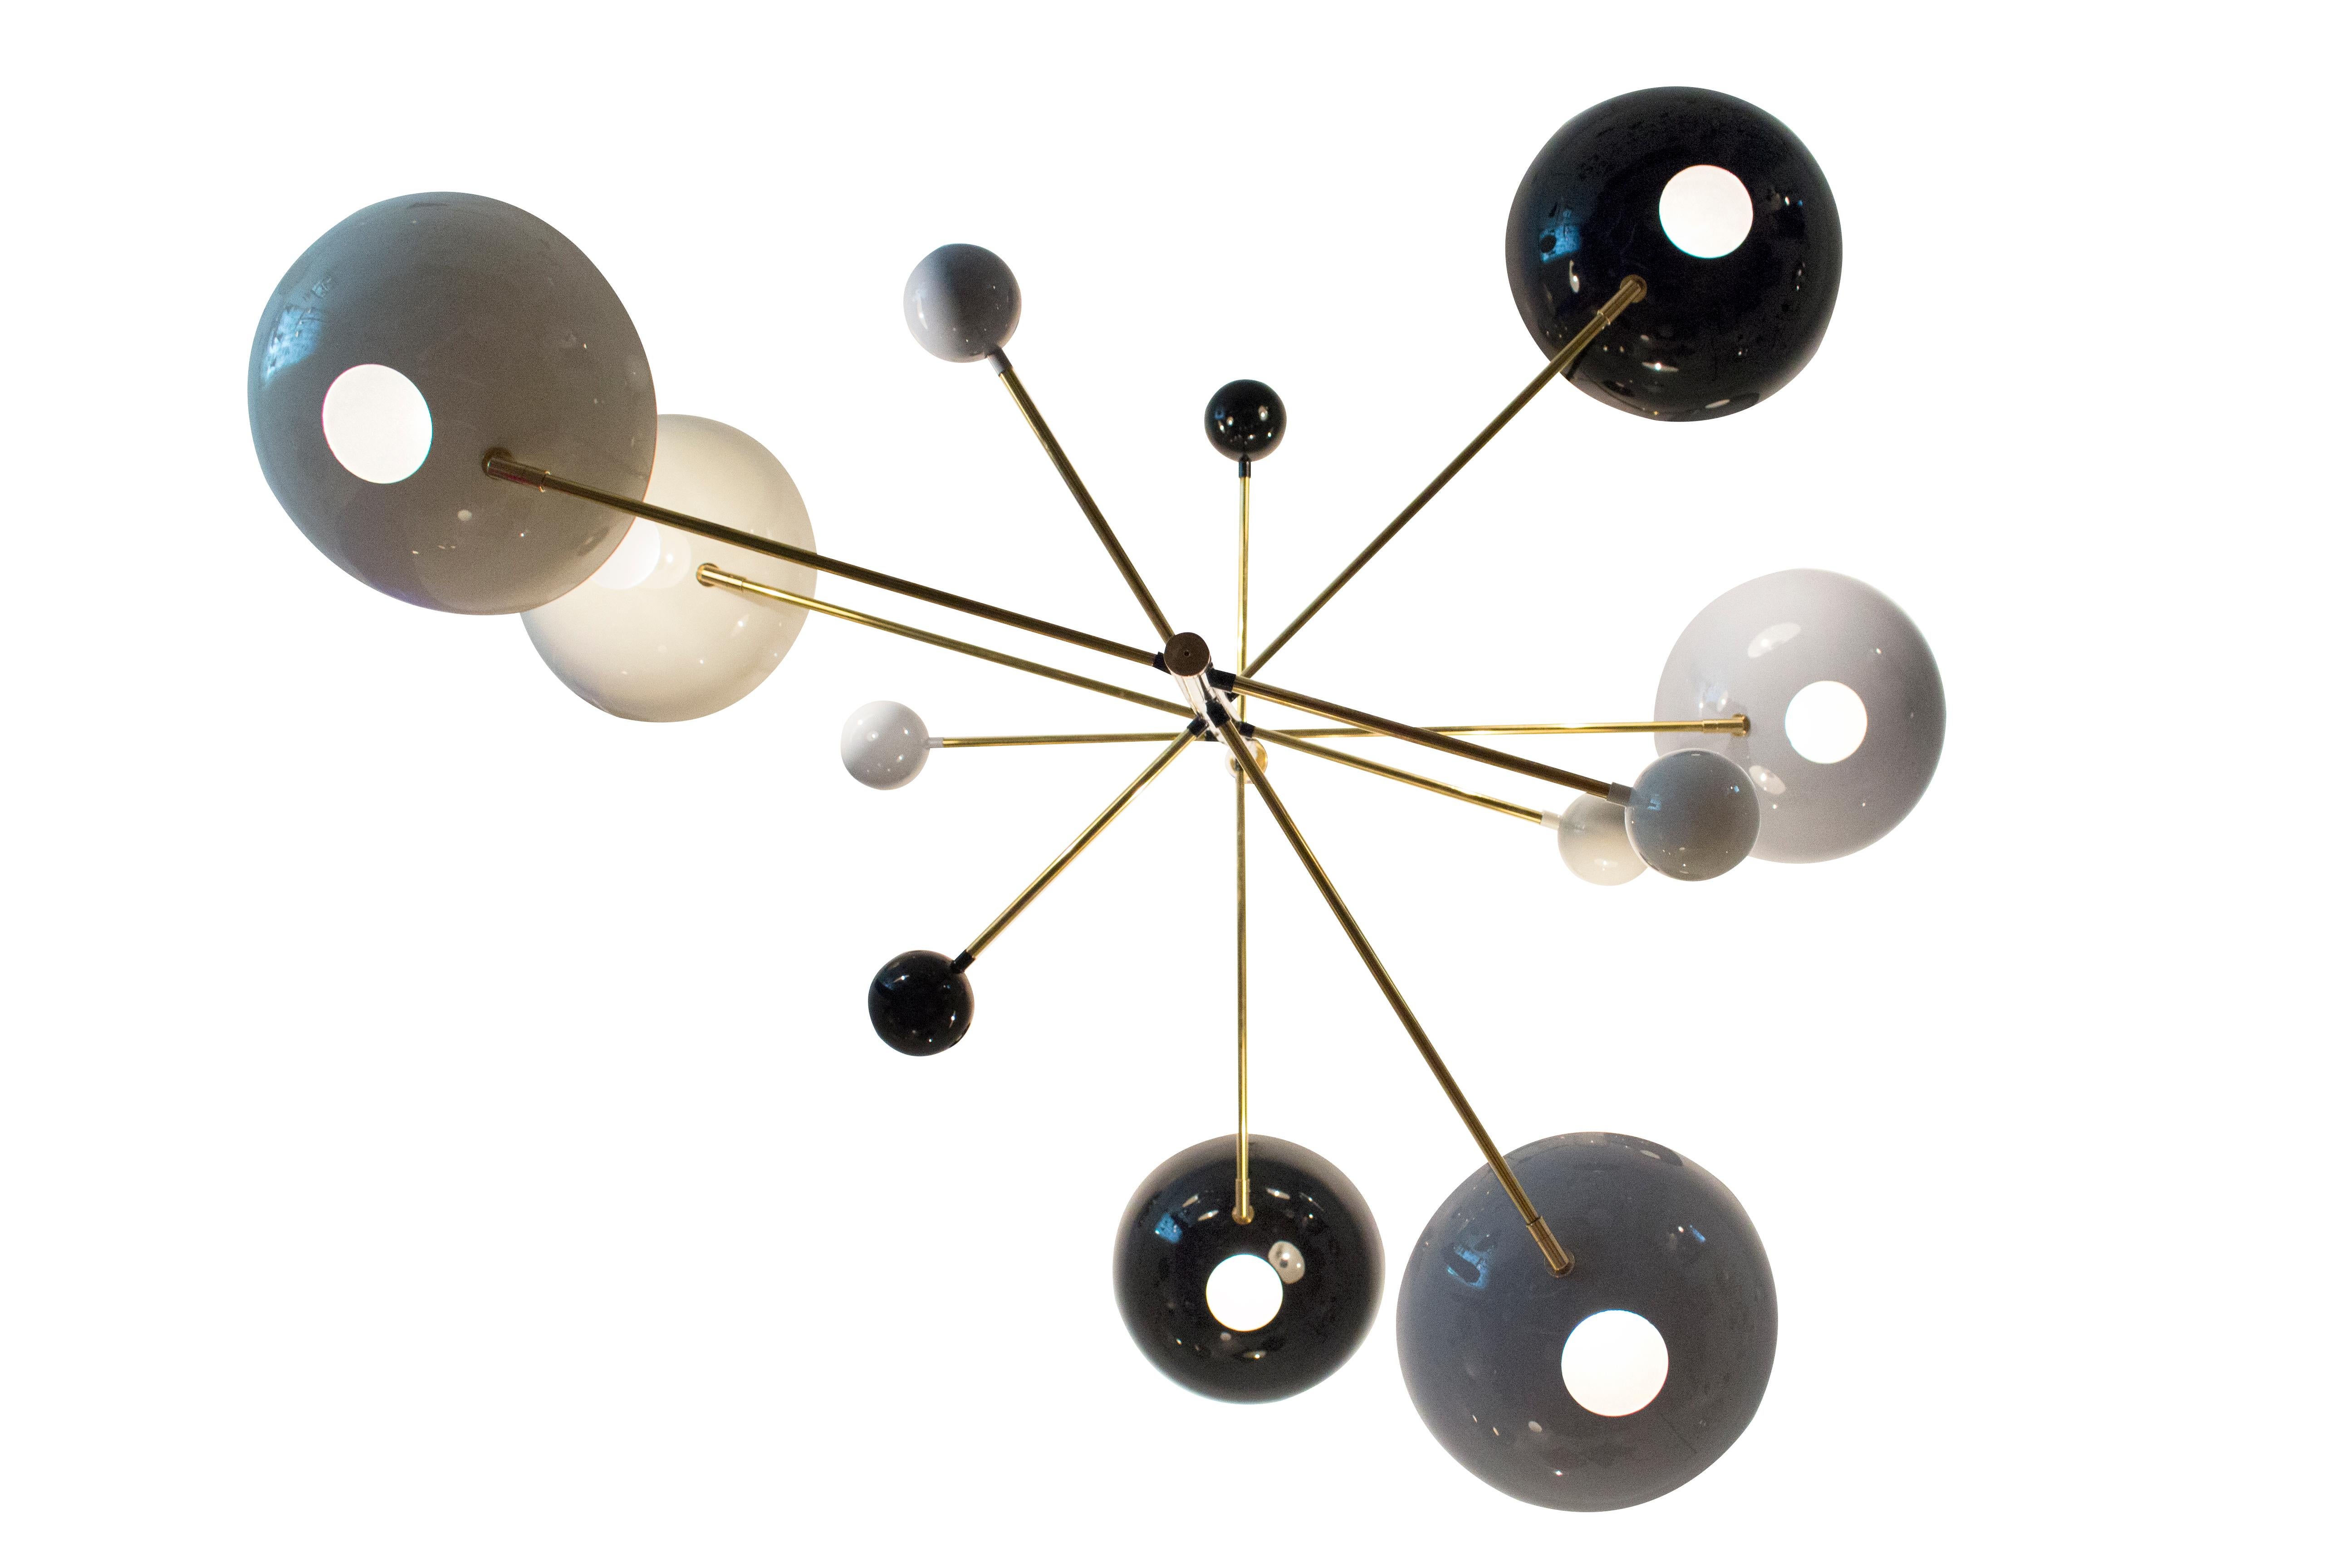 Cascading ceiling light

Brass frame

Colored enamel saucer shaped shades and balls

Contemporary

Made to order in Italy.